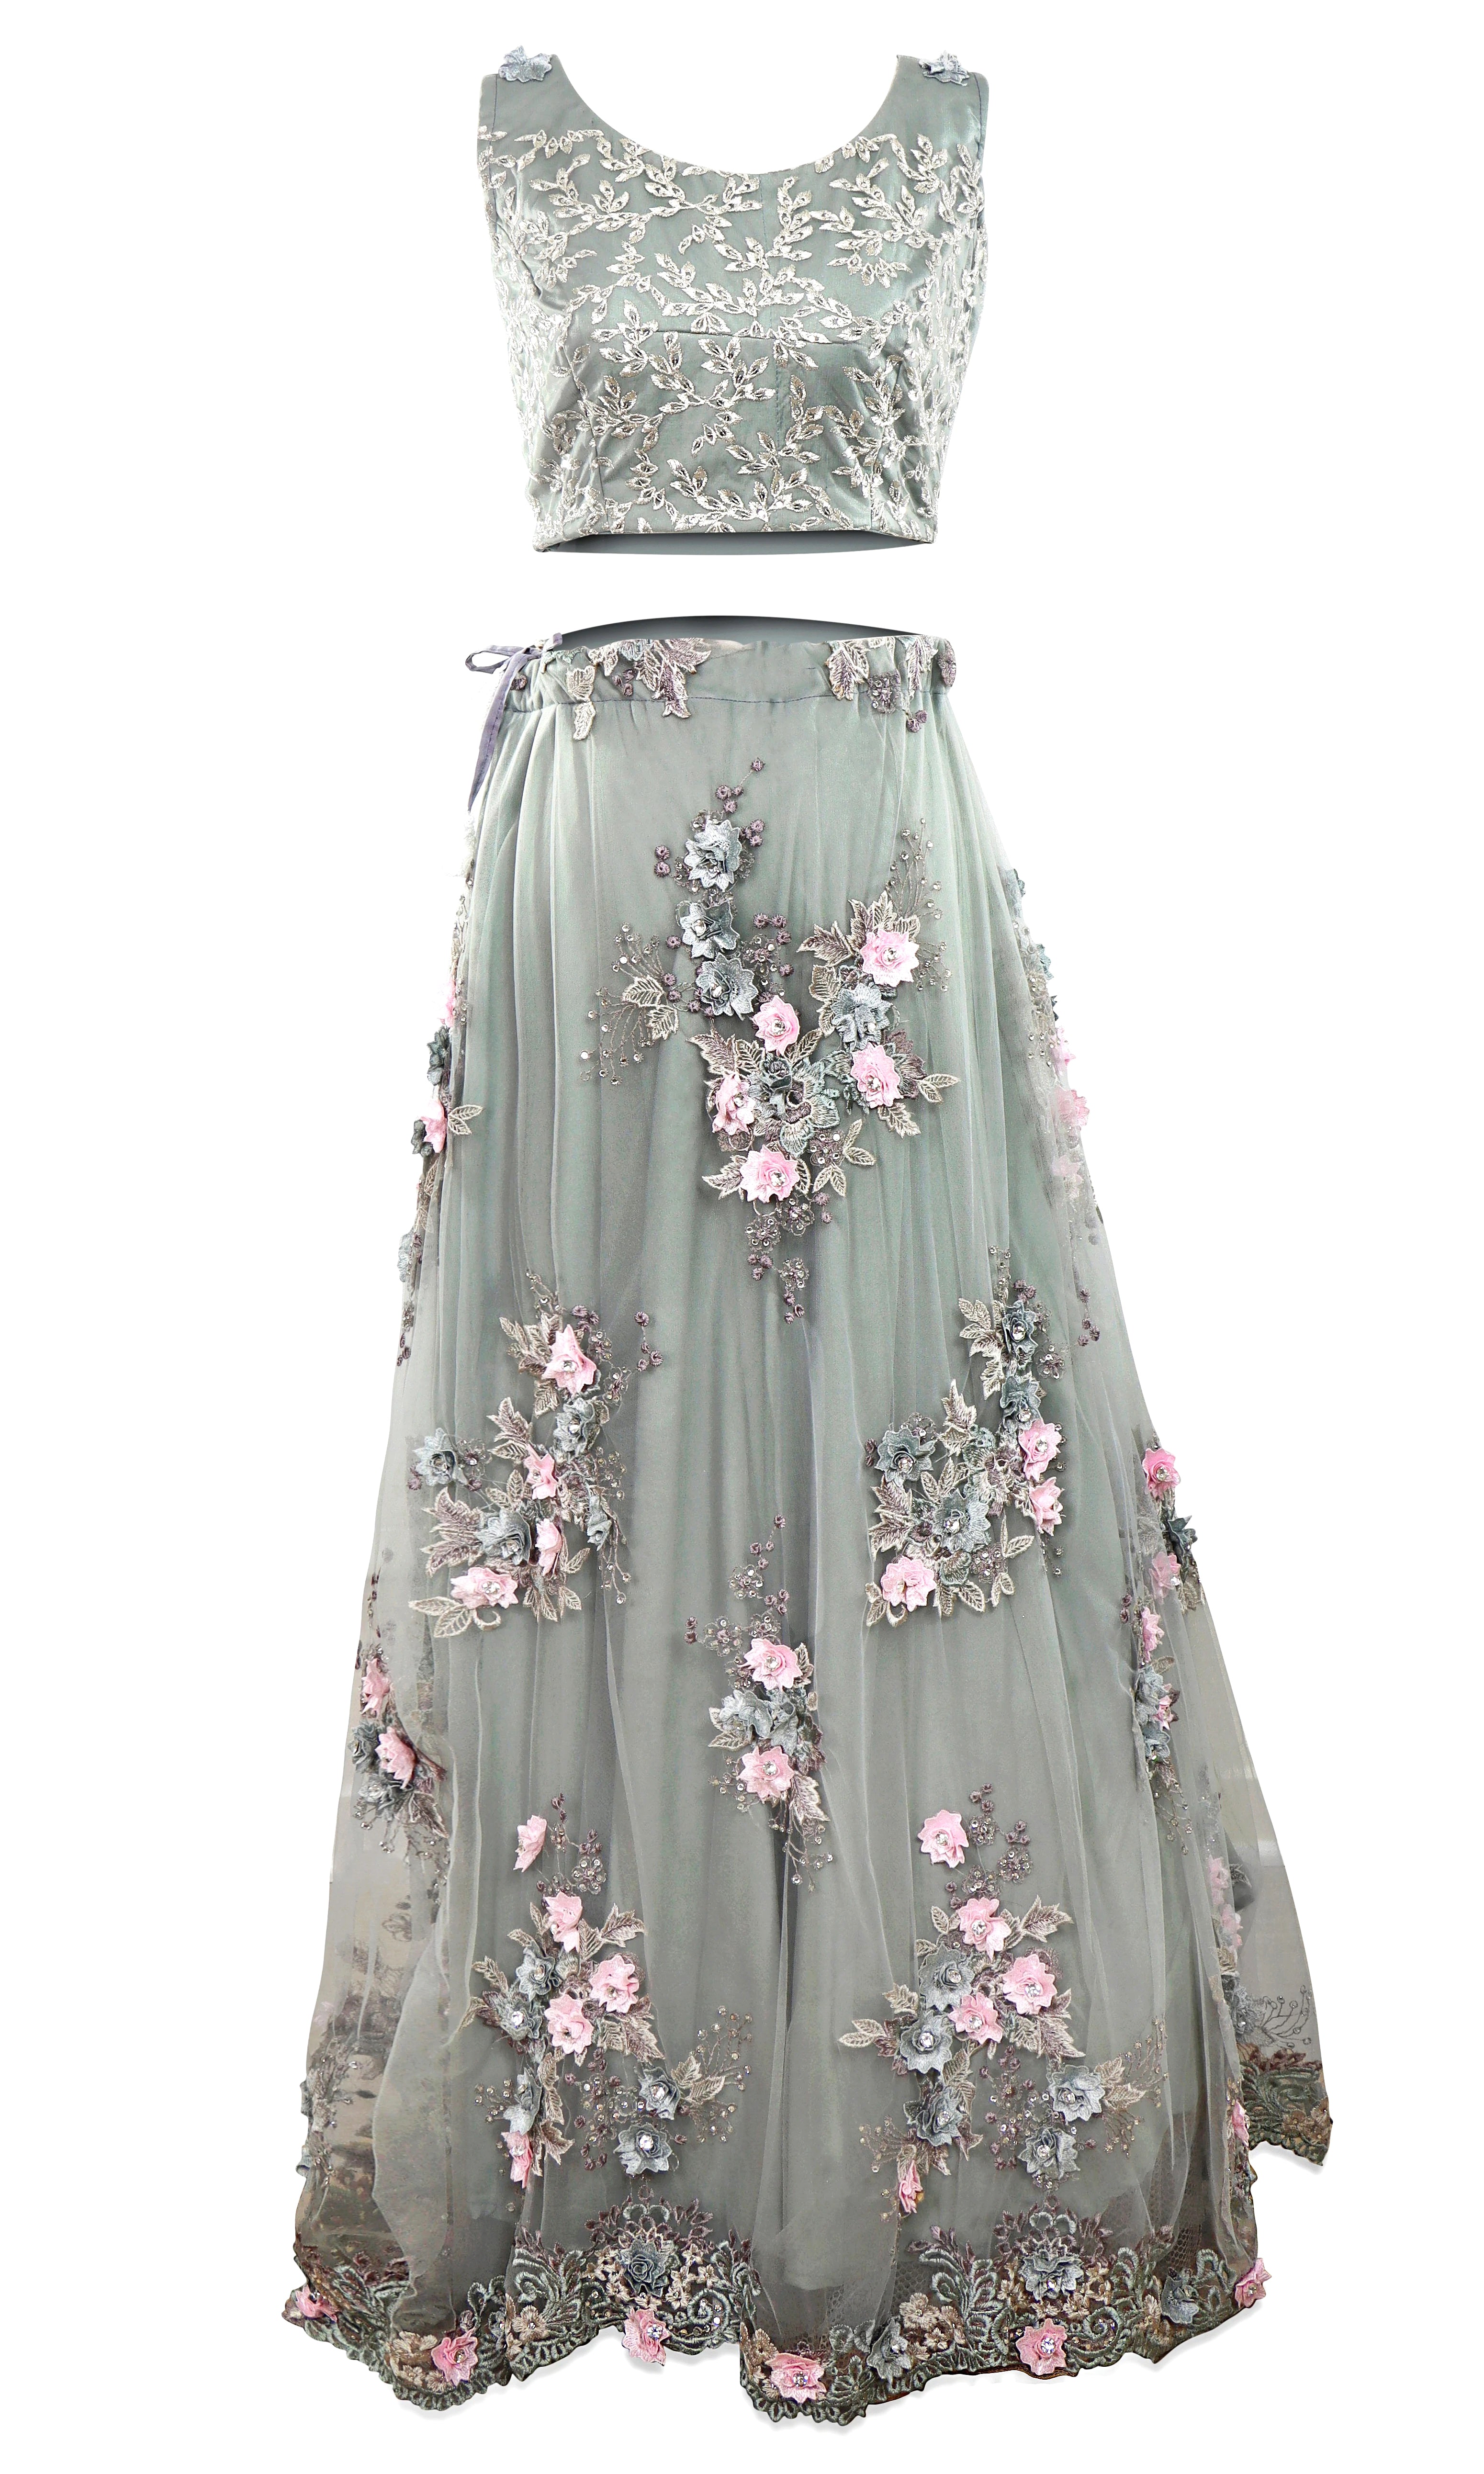 Gray net dress garnished with bouquets of floral appliqué, silver embroidery Blouse & net dupatta